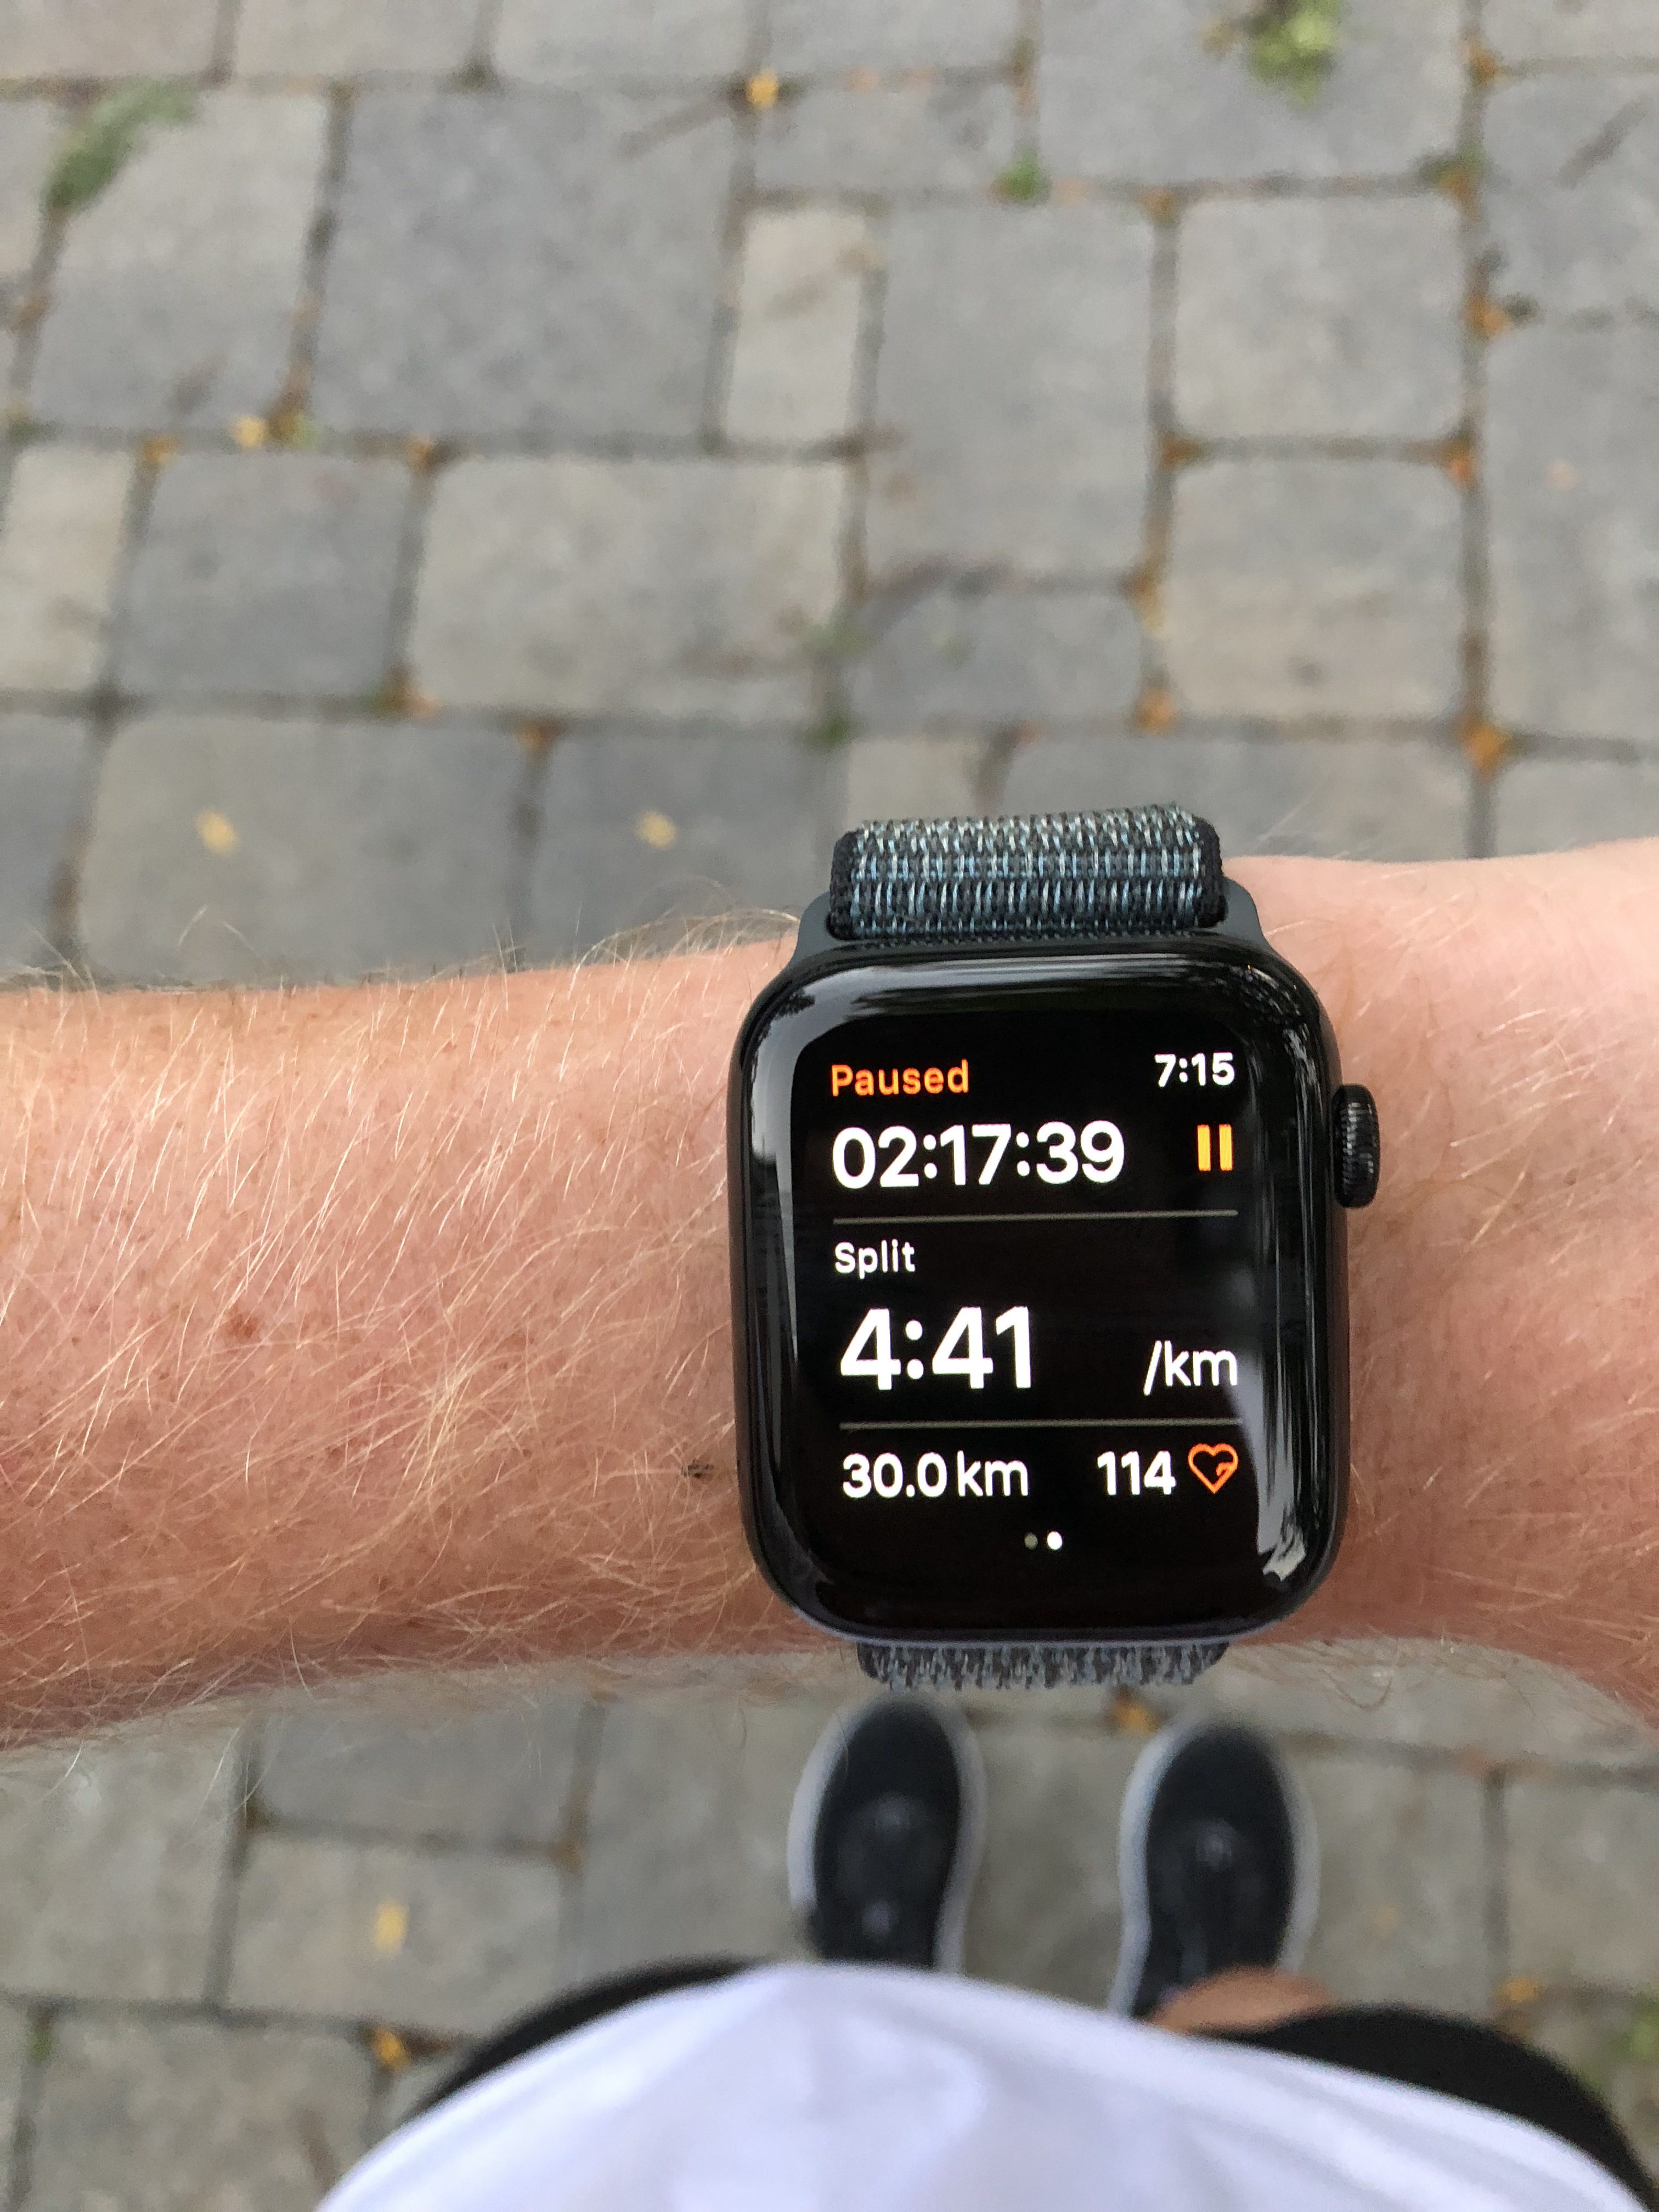 Review: The Apple Watch Series 4 